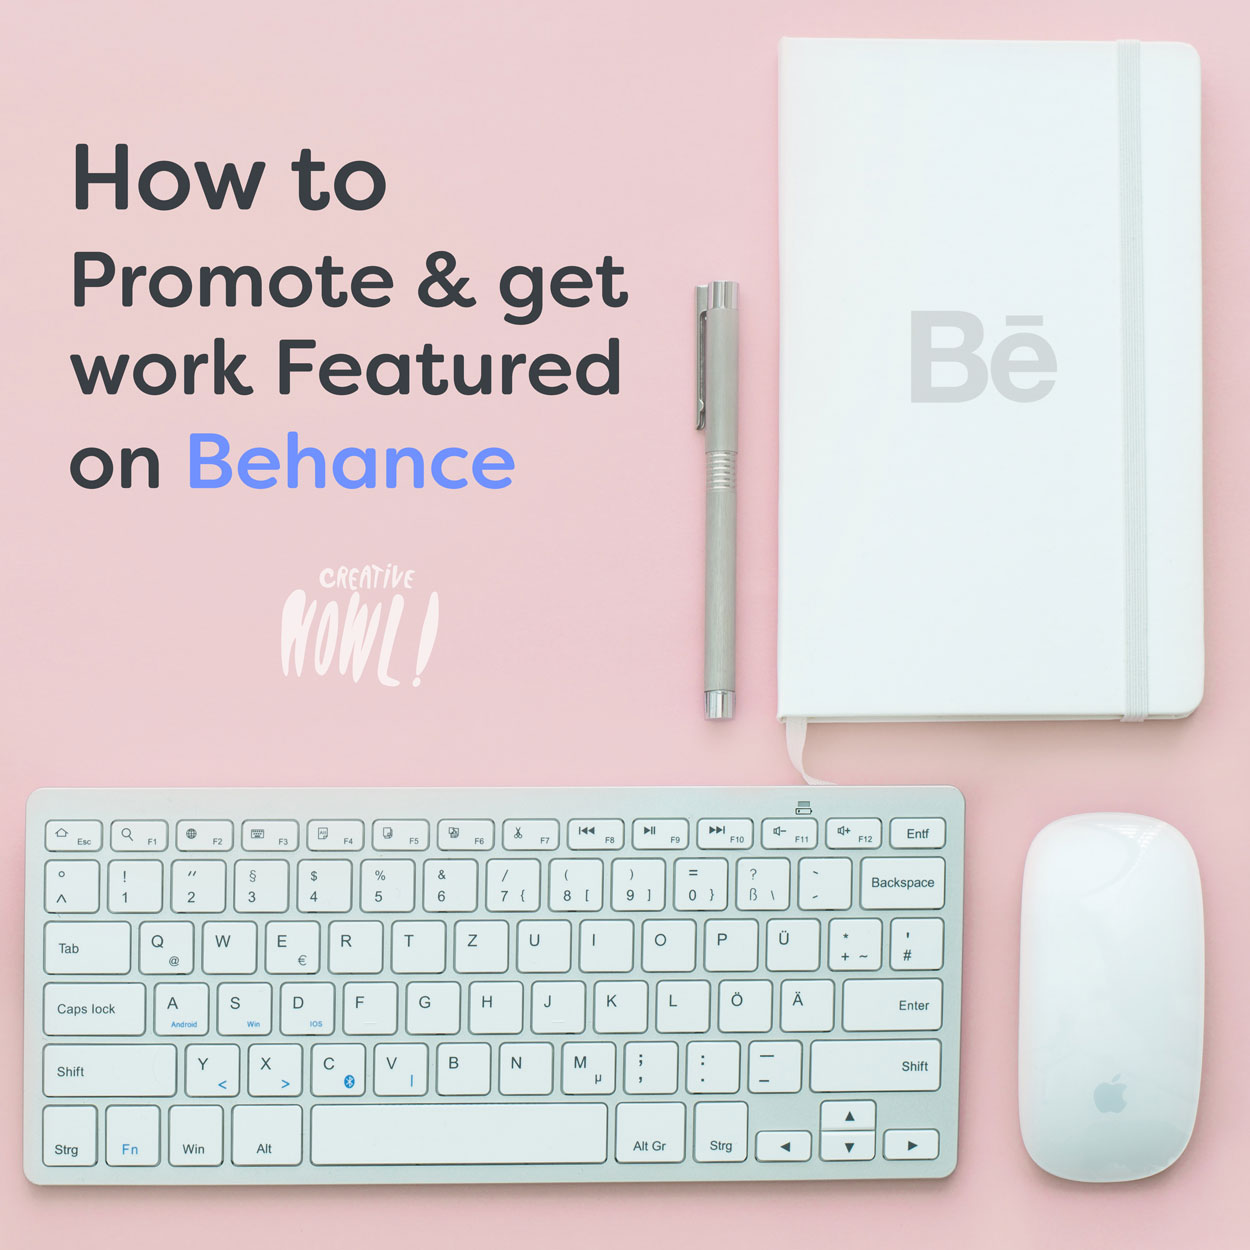 How to Promote & get work Featured on Behance